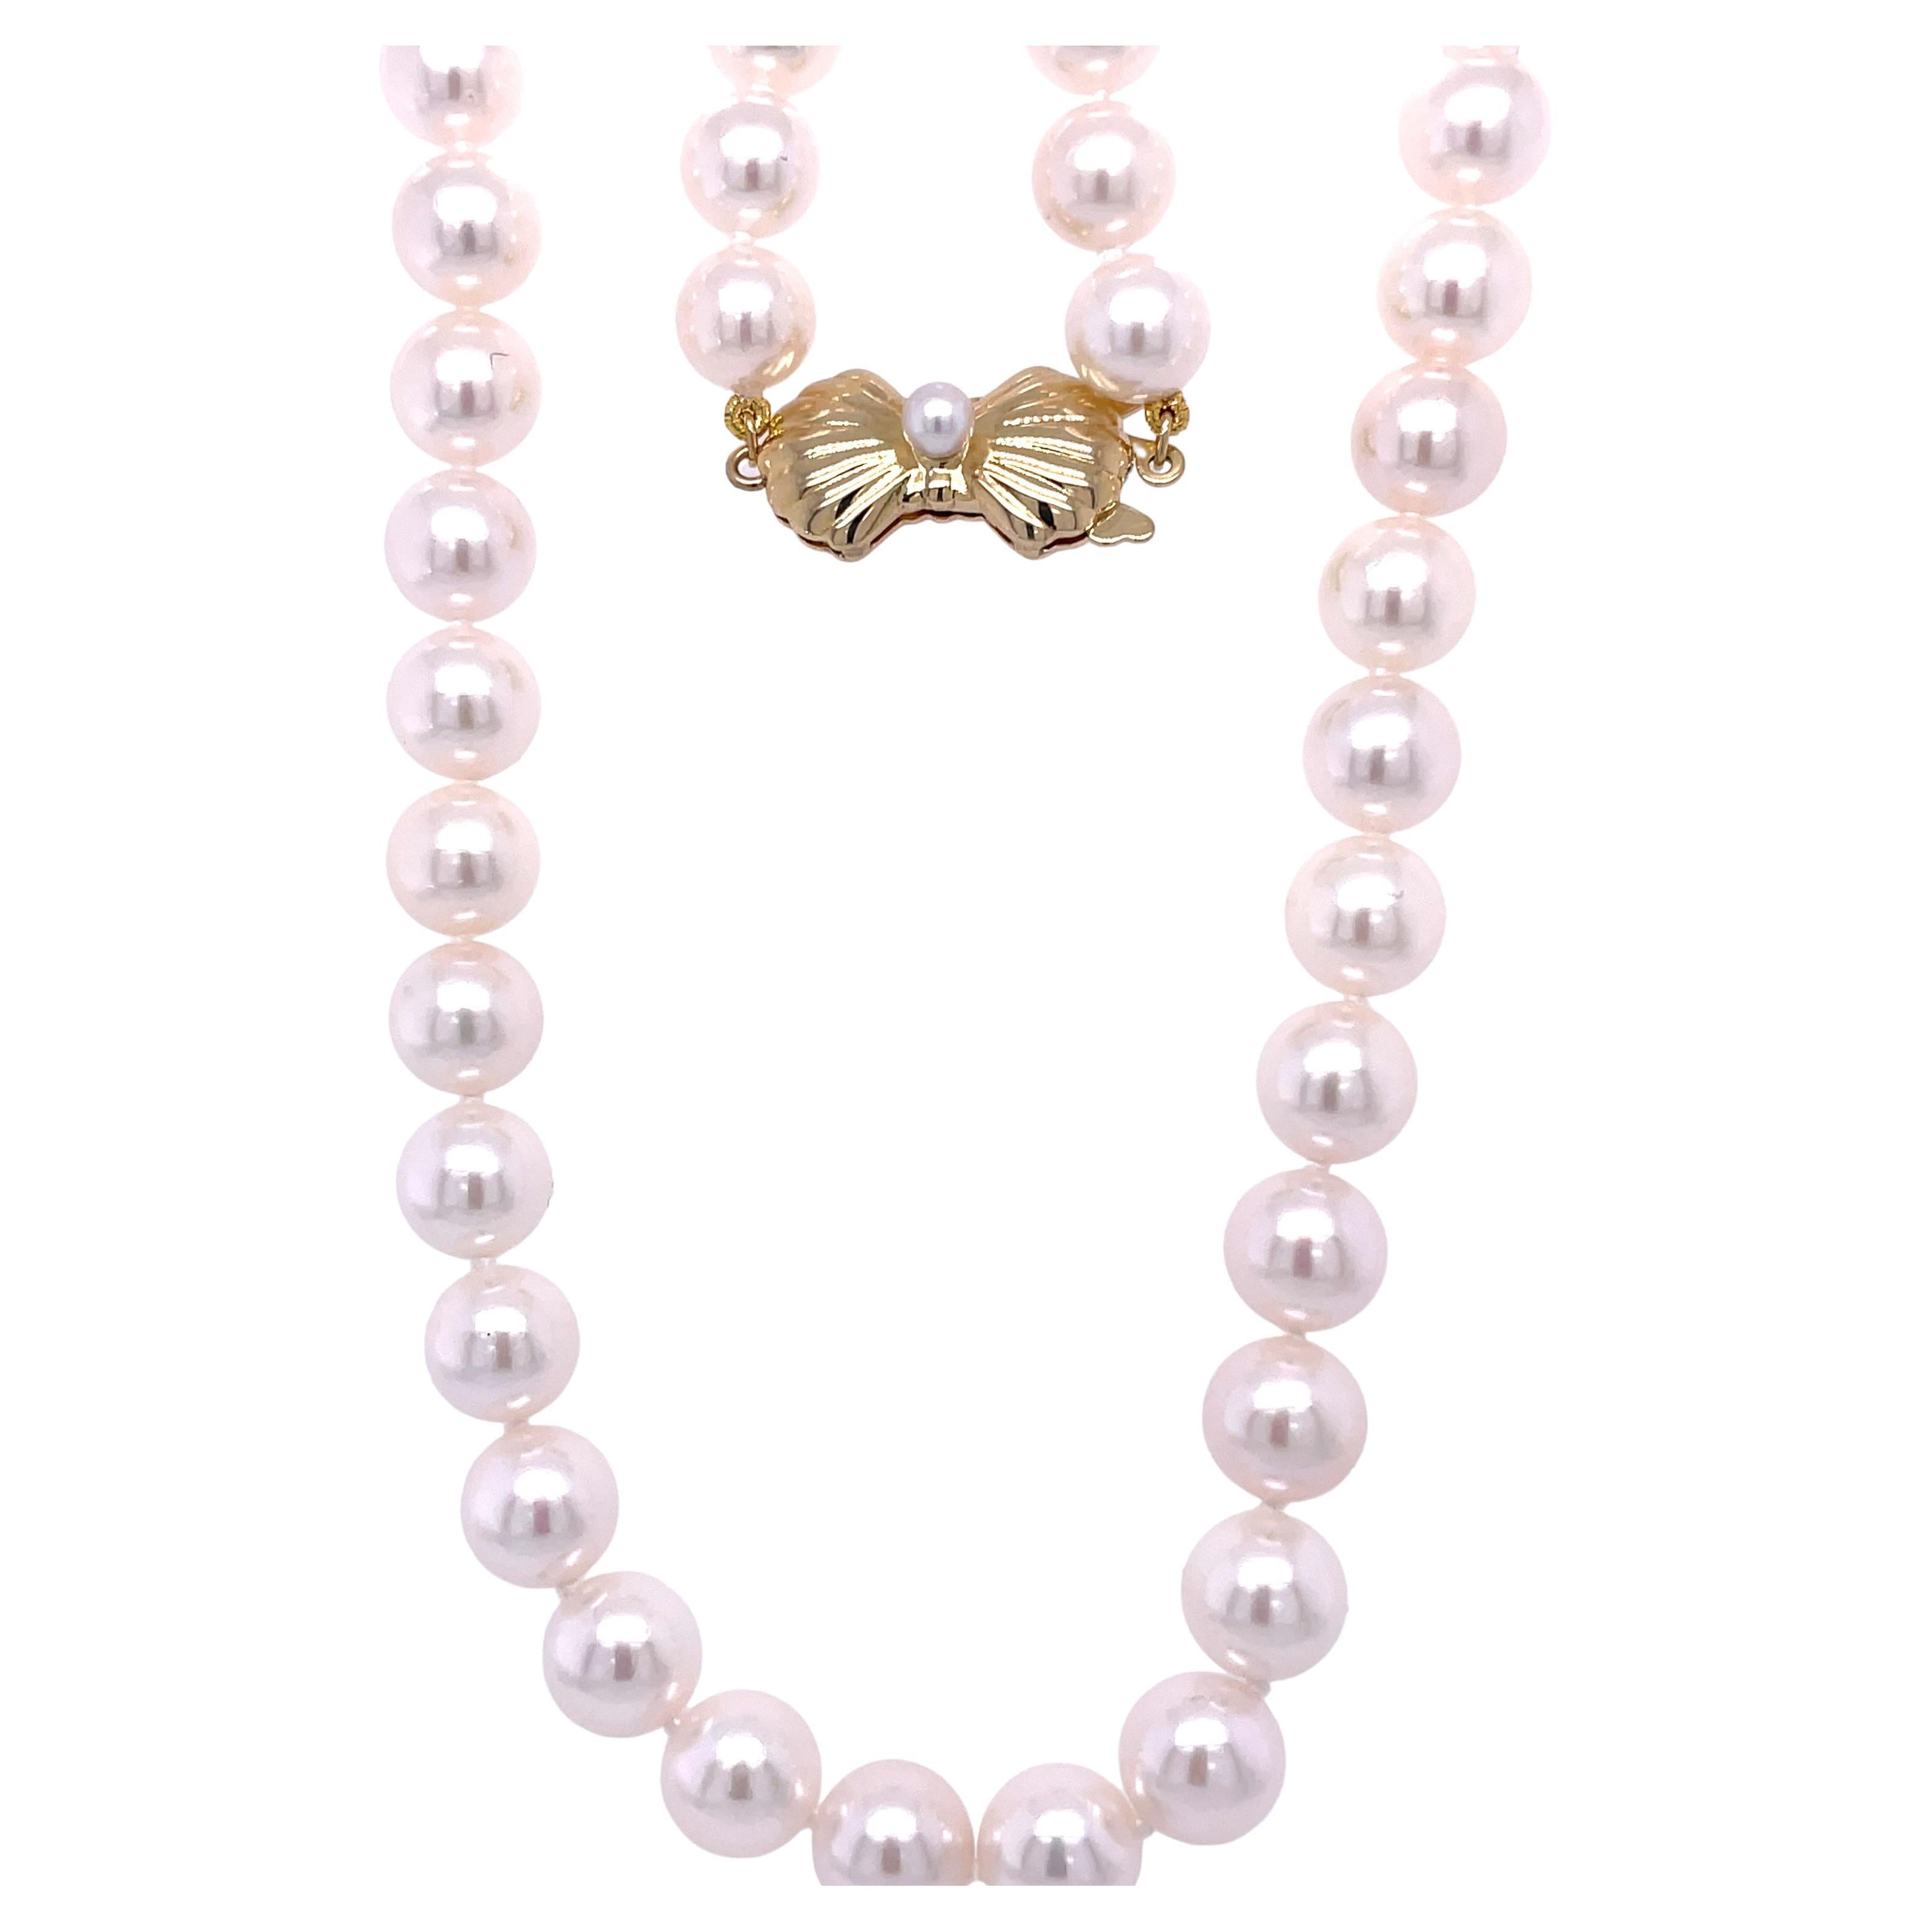 mikimoto pearl necklace - jewelry - by owner - sale - craigslist